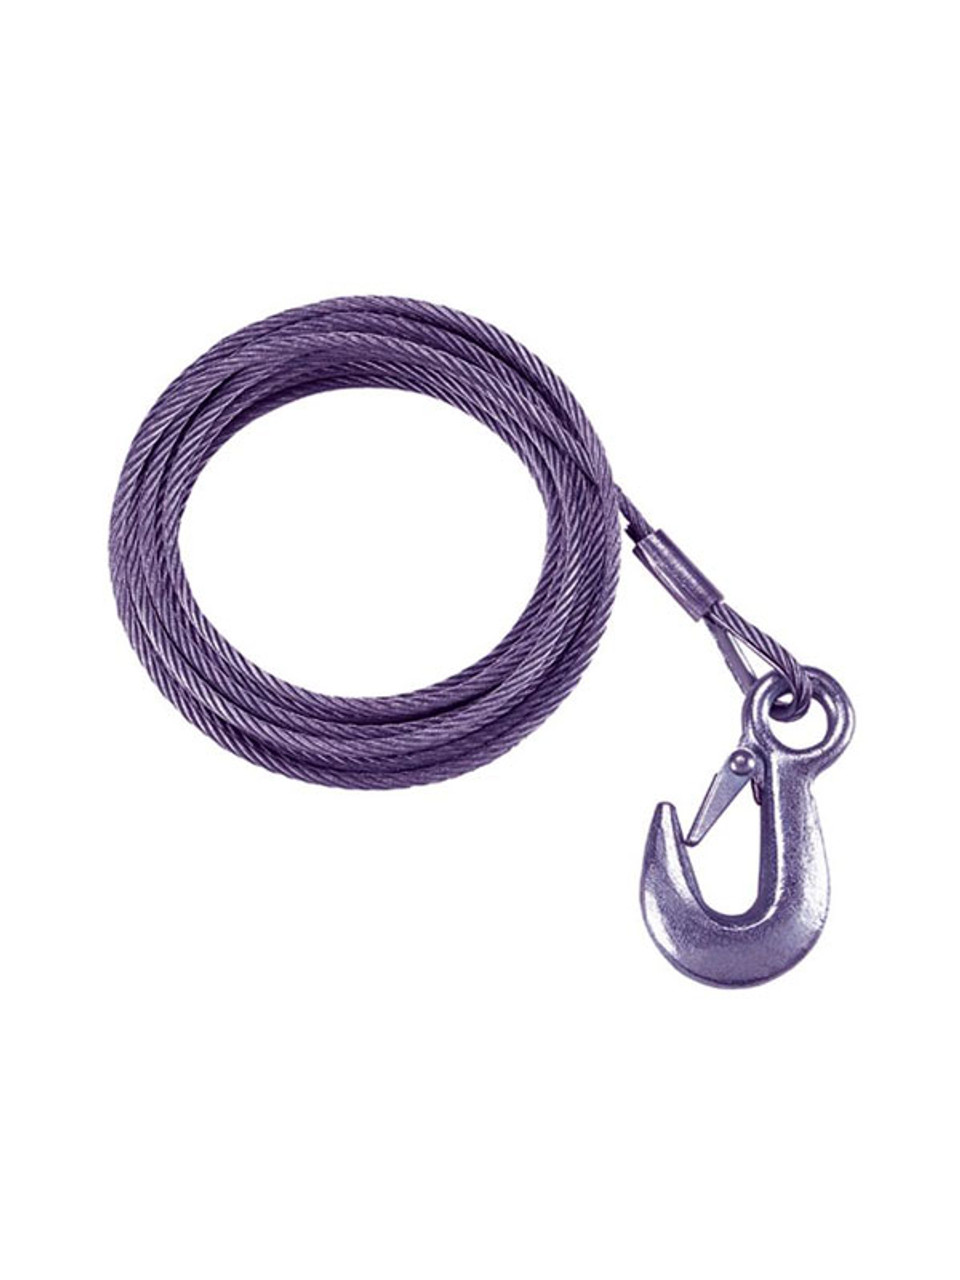 WC50 --- 50' Galvanized Winch Cable with Hook